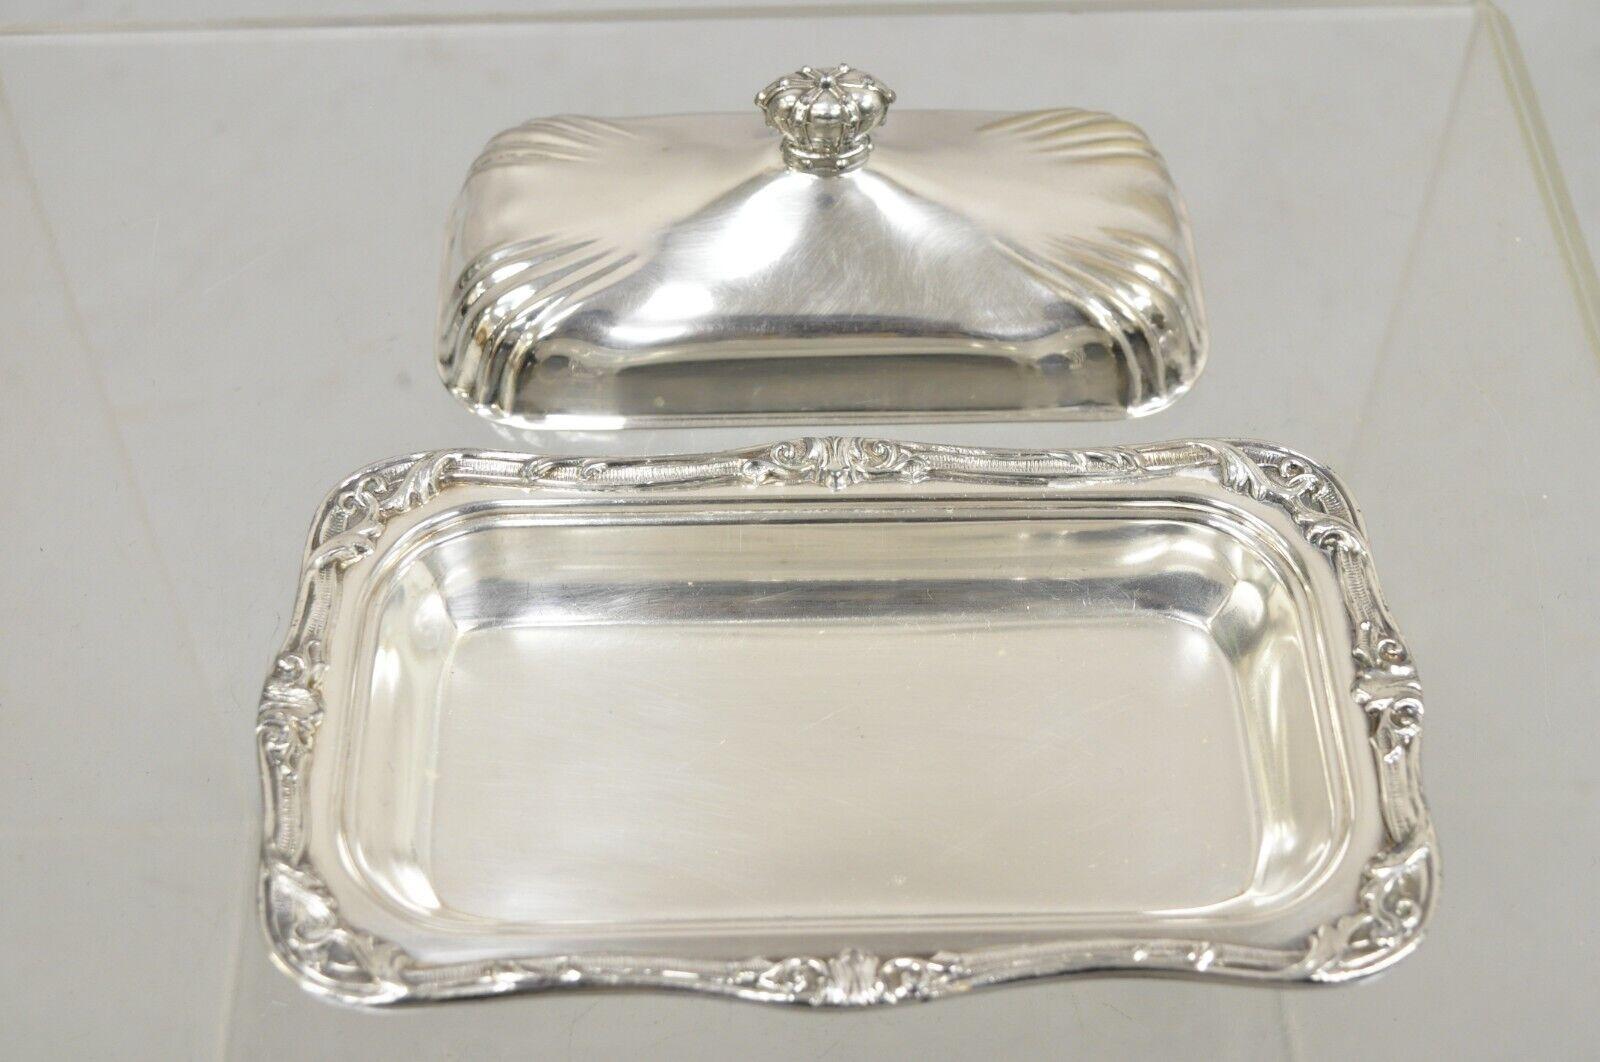 Vintage Coronet Silver Victorian Silver Plated Covered Butter Dish Crown Handle For Sale 4